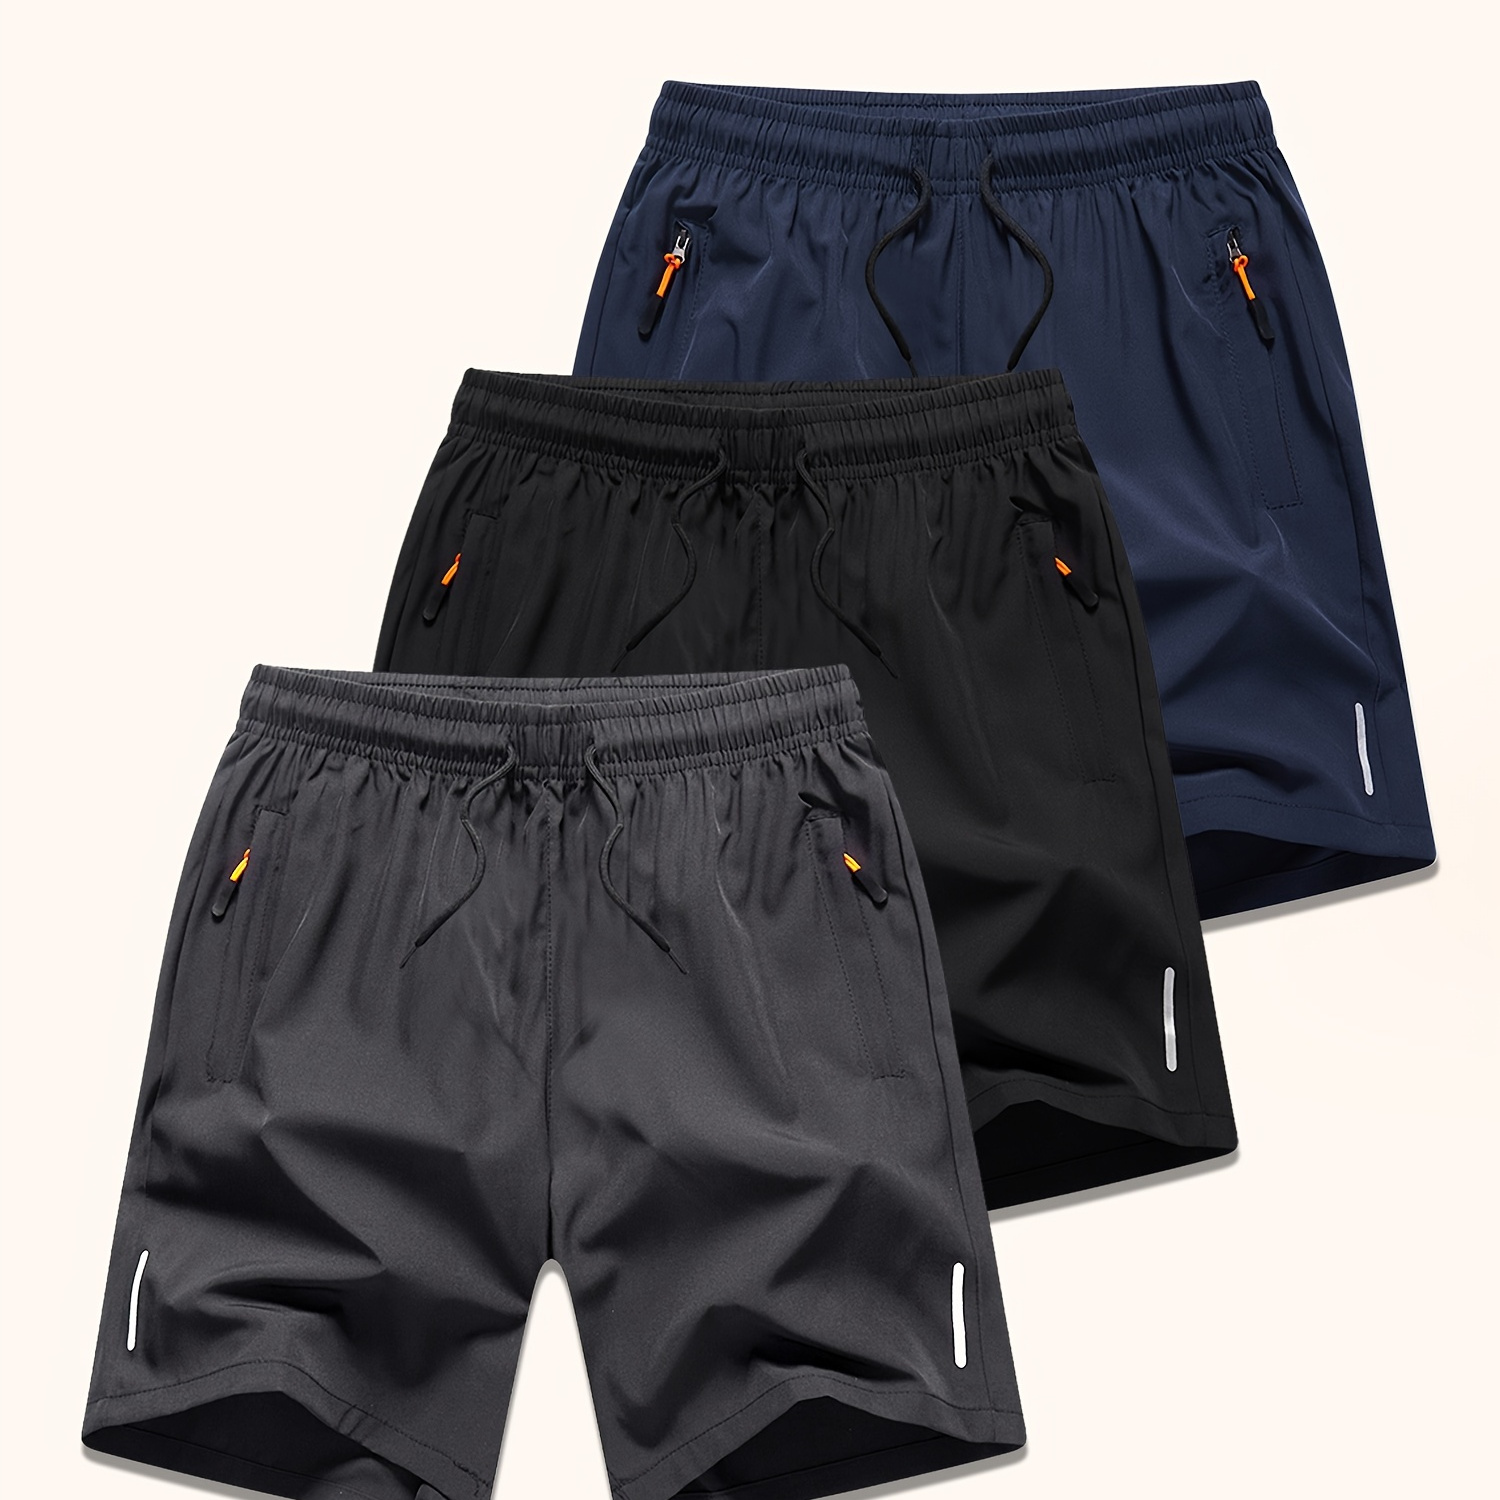 

3-pack Boys Casual Athletic Shorts With Zipper Pocket, Quick Dry Breathable Elastic Waist Shorts For Summer